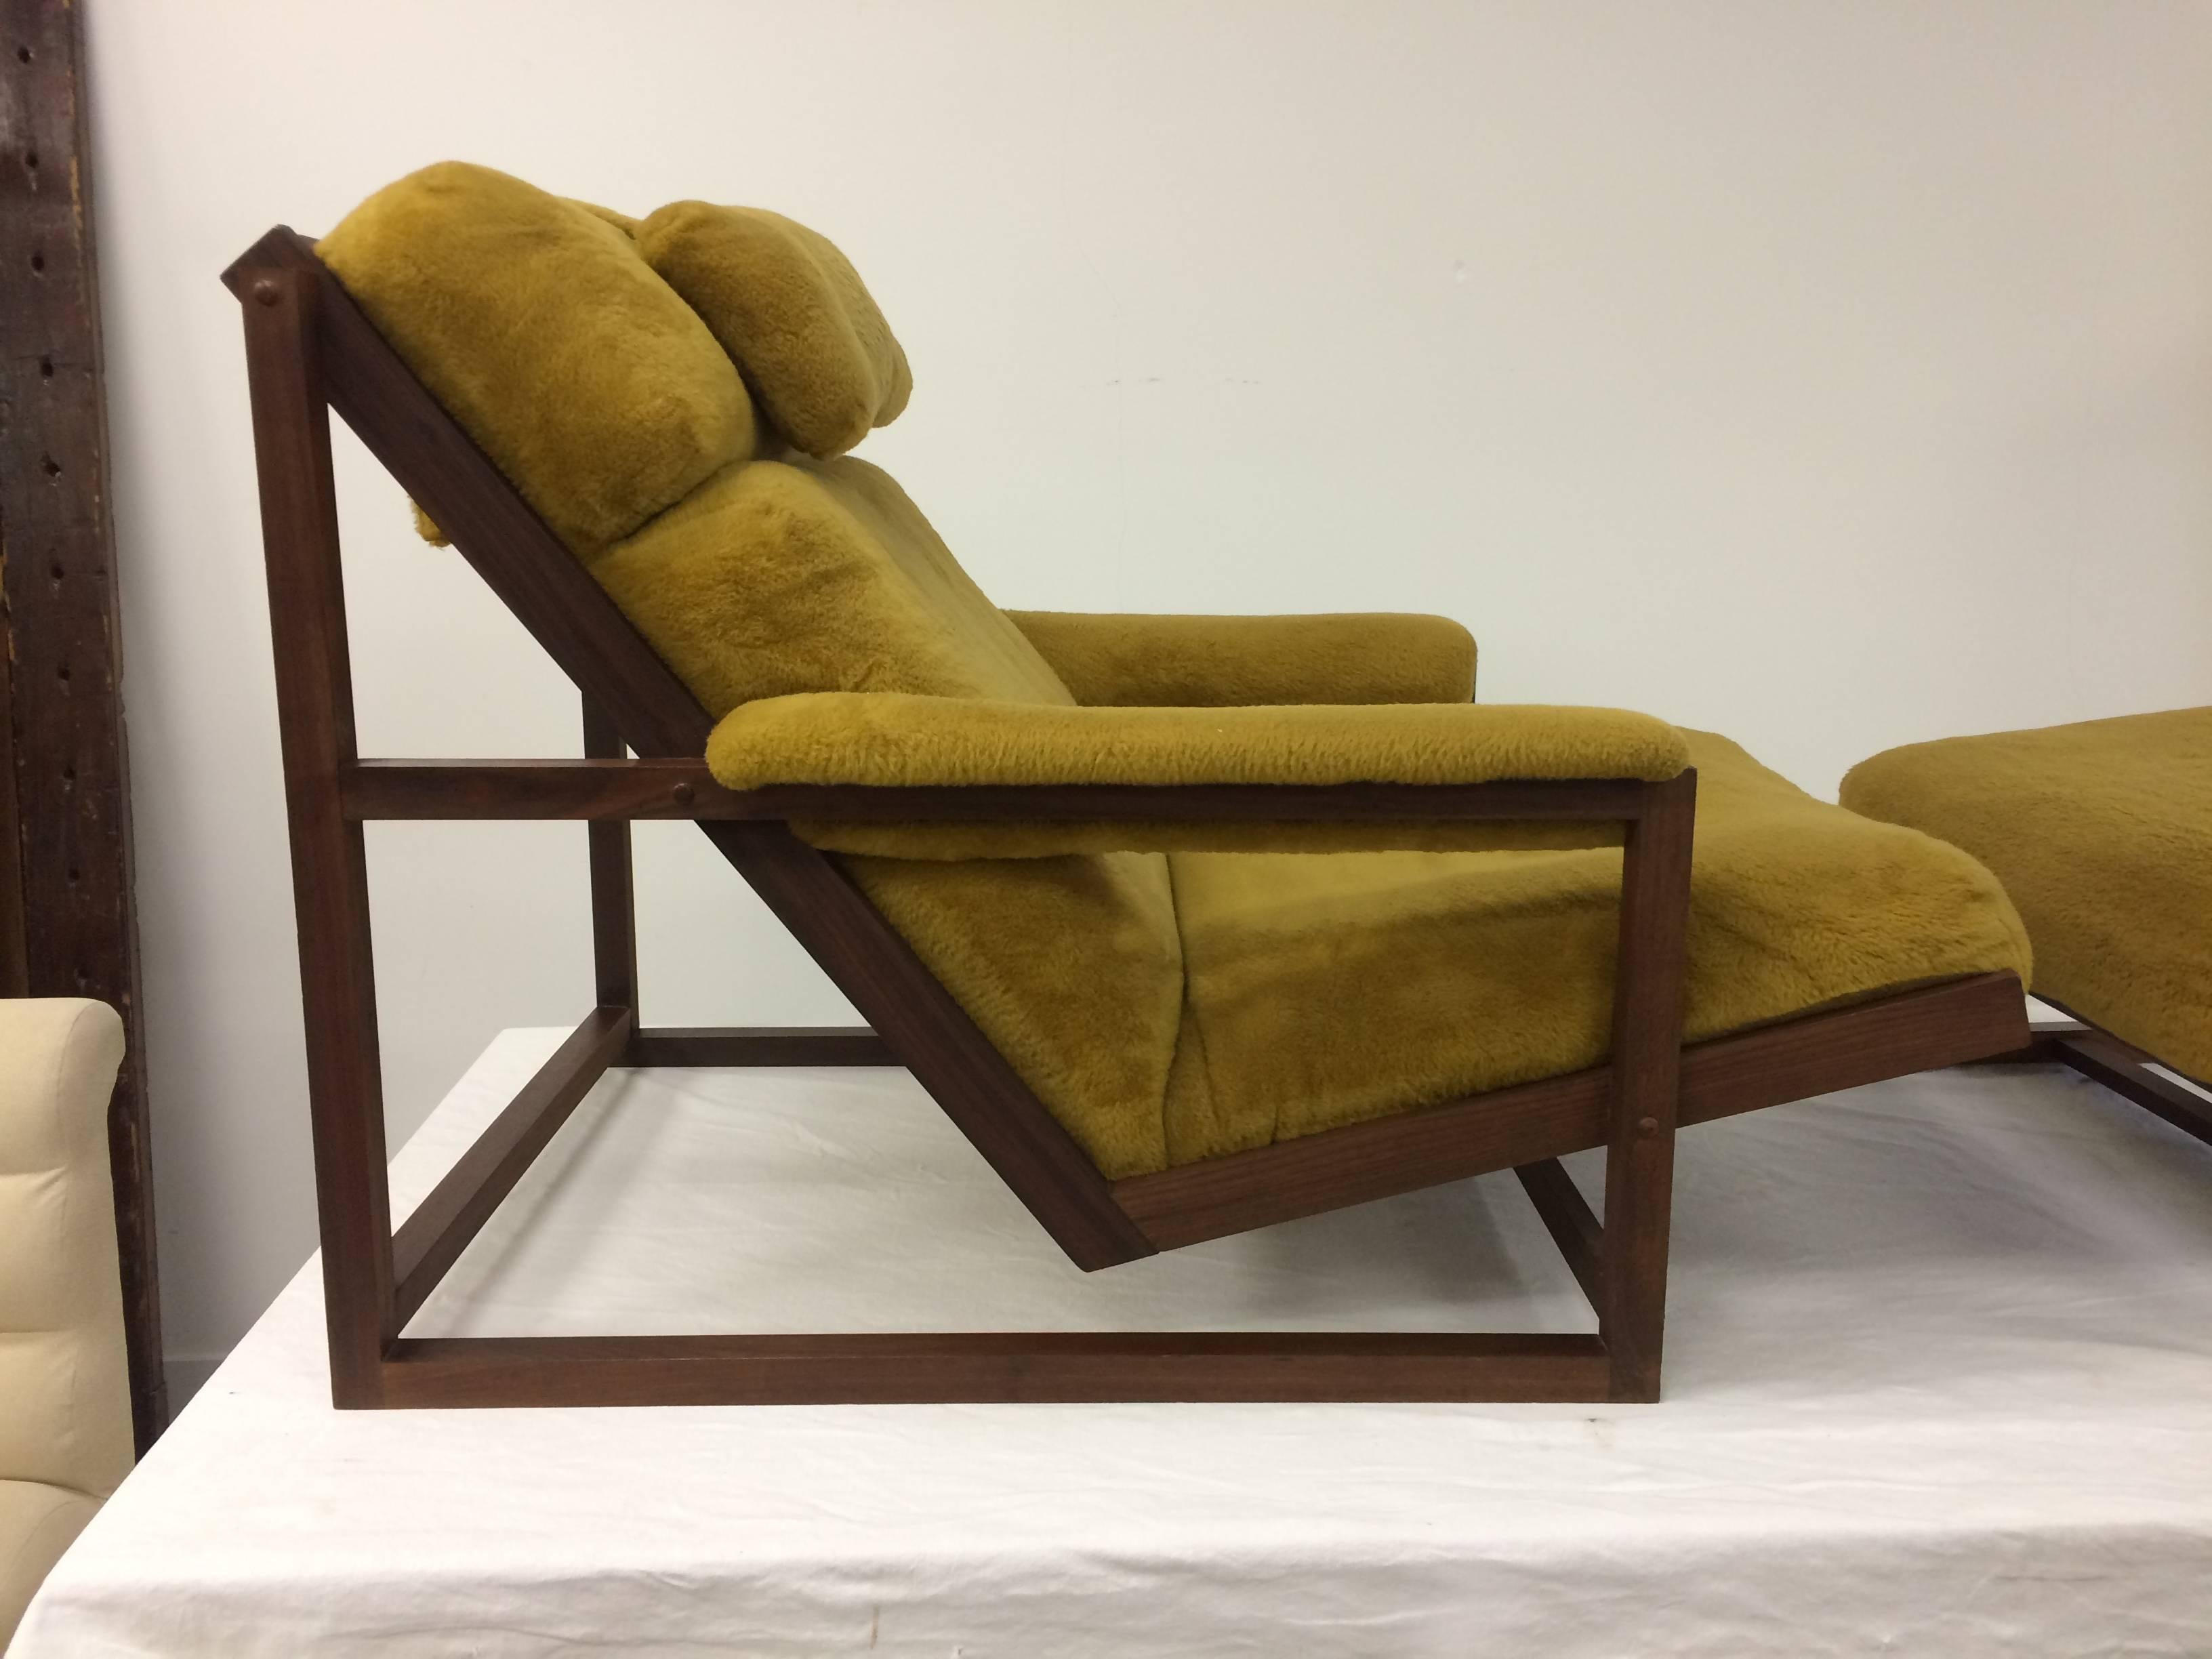 Early production of the Milo Baughman Cruisin chair.
Great lines, great style. Not many of these still around. All original condition.
Measurements 
44L
18 ah
I3 SH
31 bh
28.5 w

21L
13h
28 w
